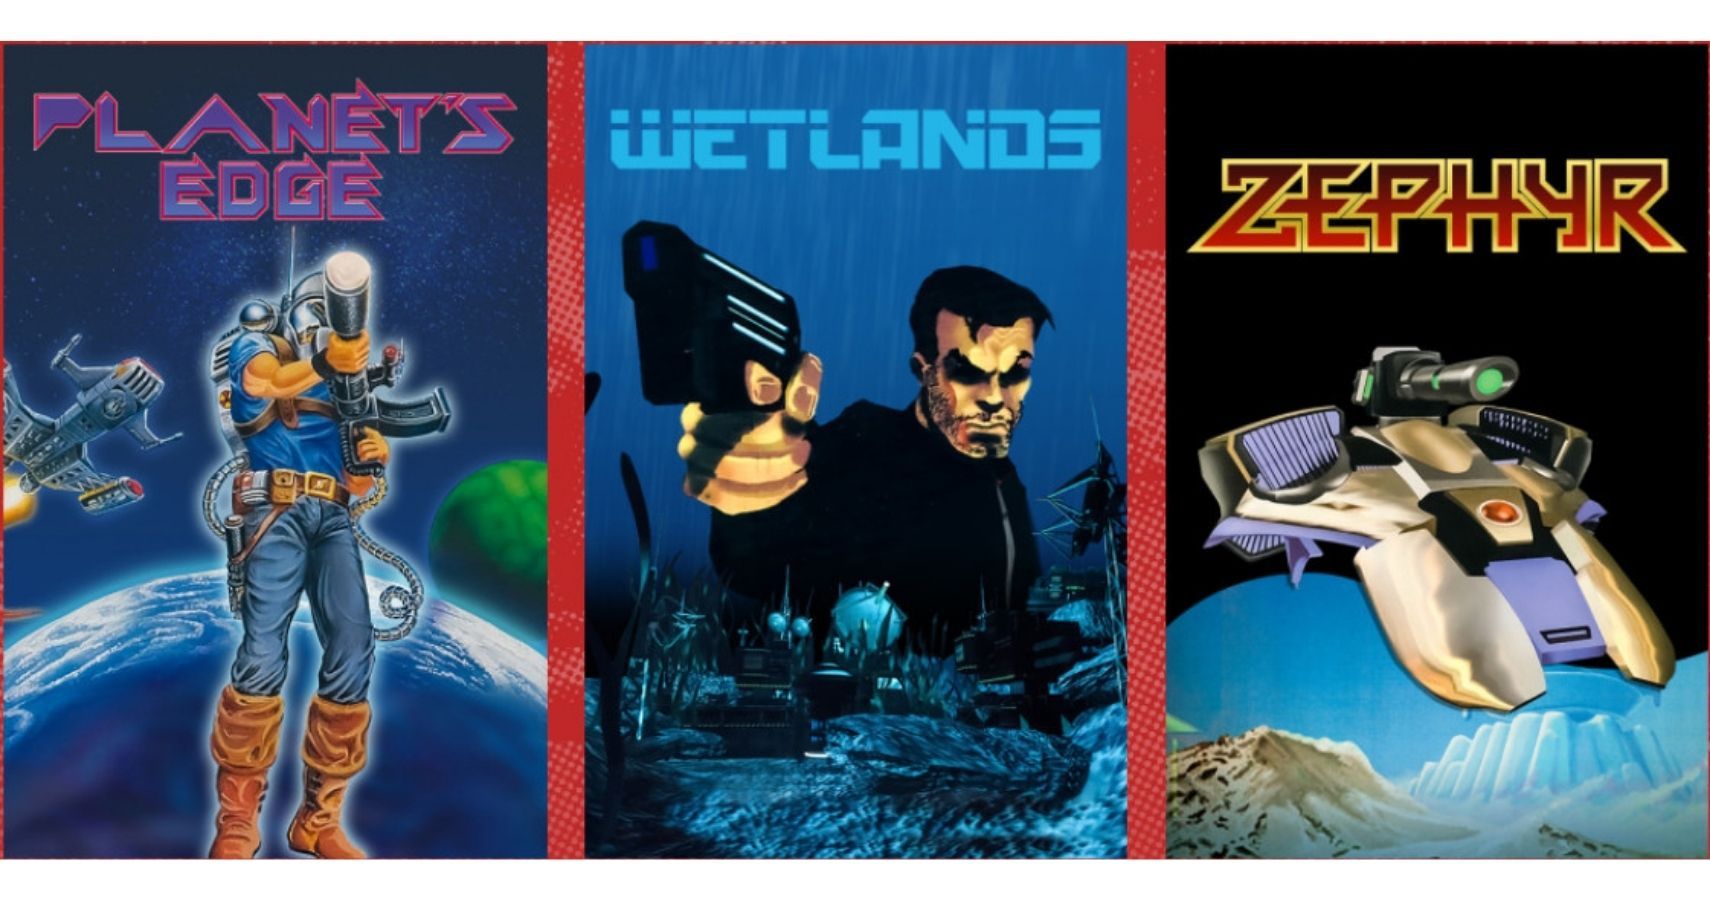 Classic Video Games Planets Edge Wetlands And Zephyr Now On GOG